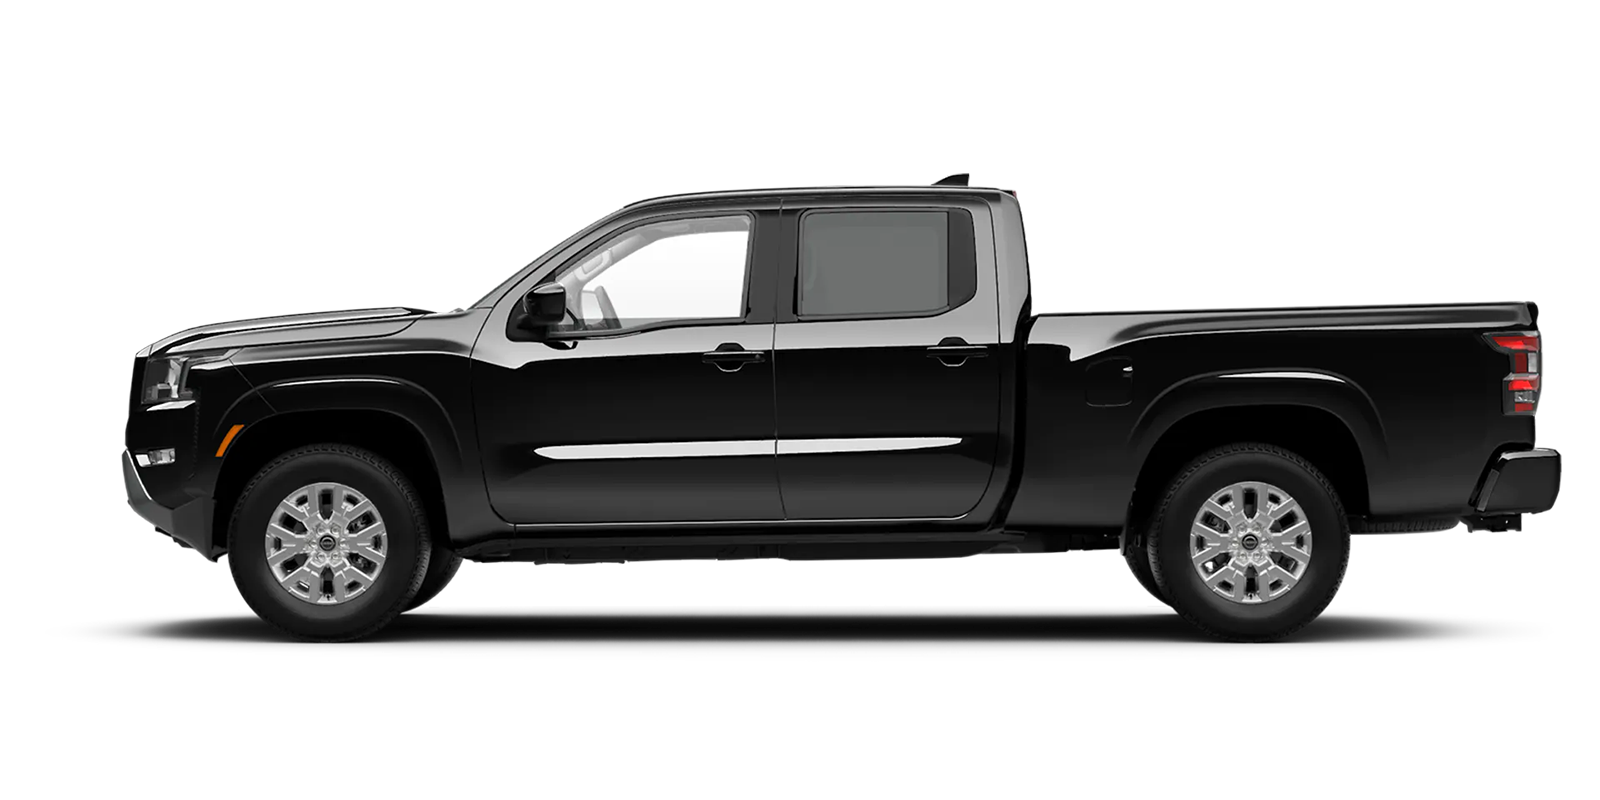 2022 Frontier Crew Cab Long Bed SV 4x4 in Super Black | Jim Click Nissan in Tucson AZ